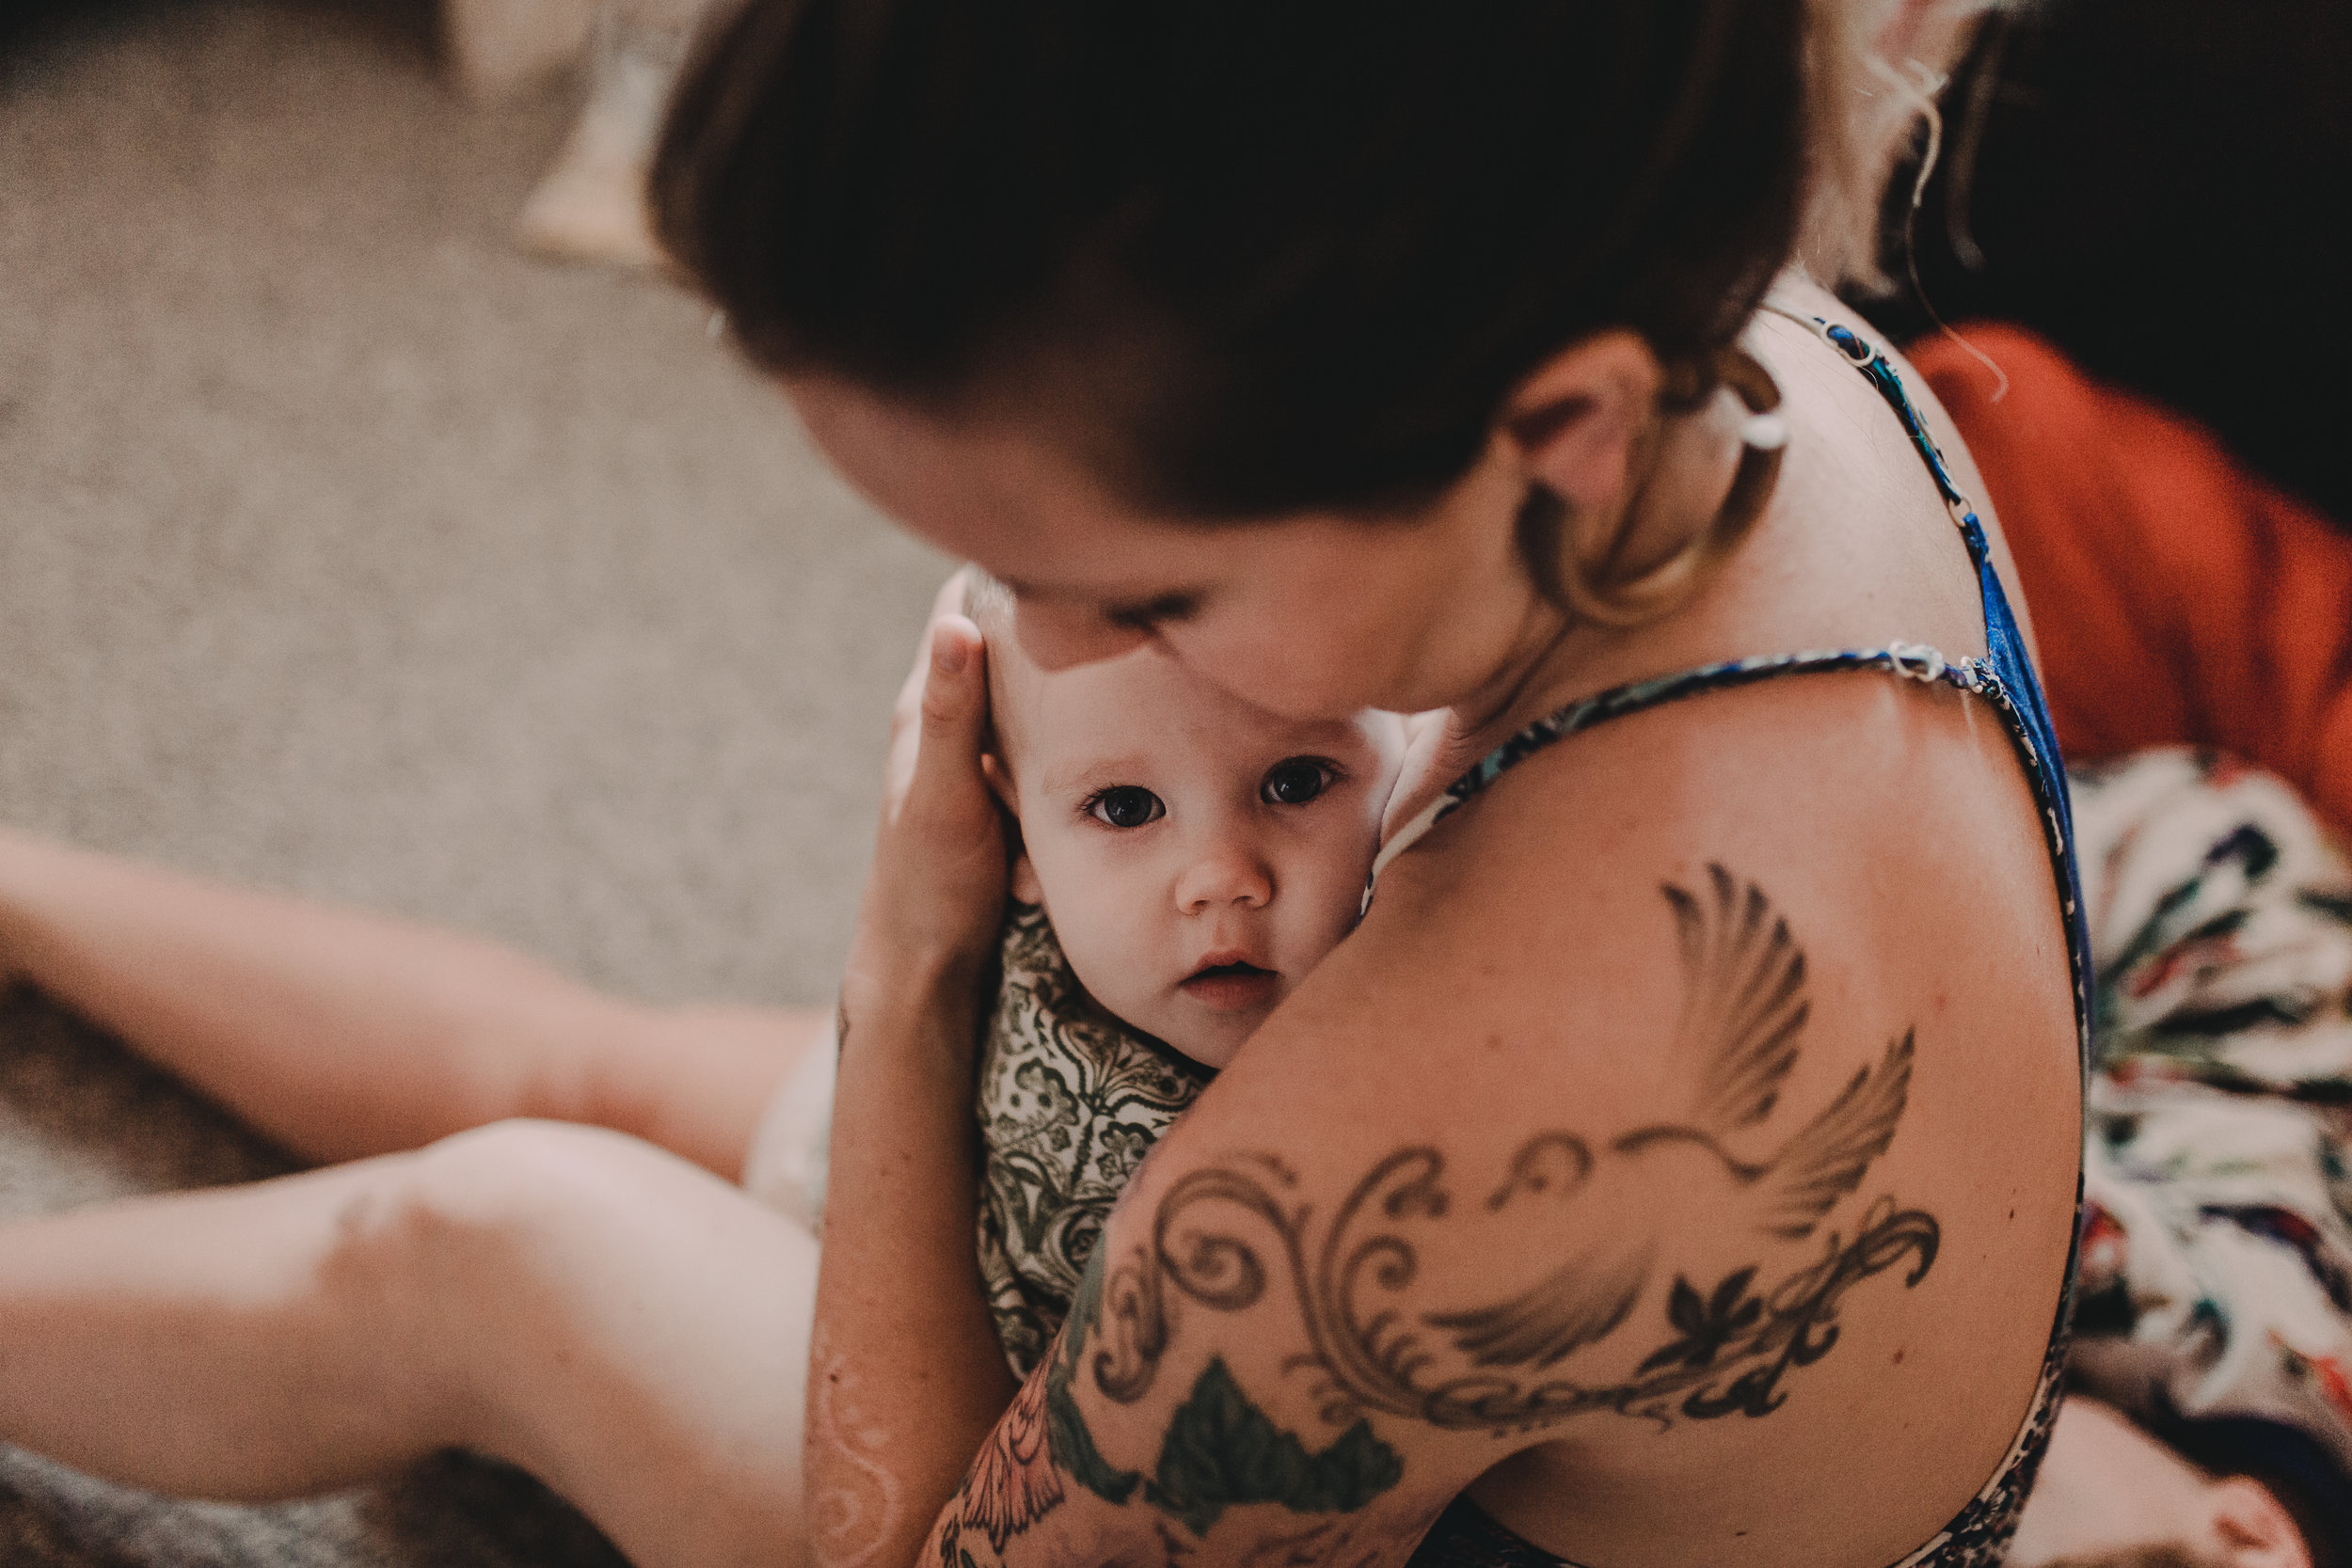  Tattooed Mother embracing baby girl who stares at the camera. 